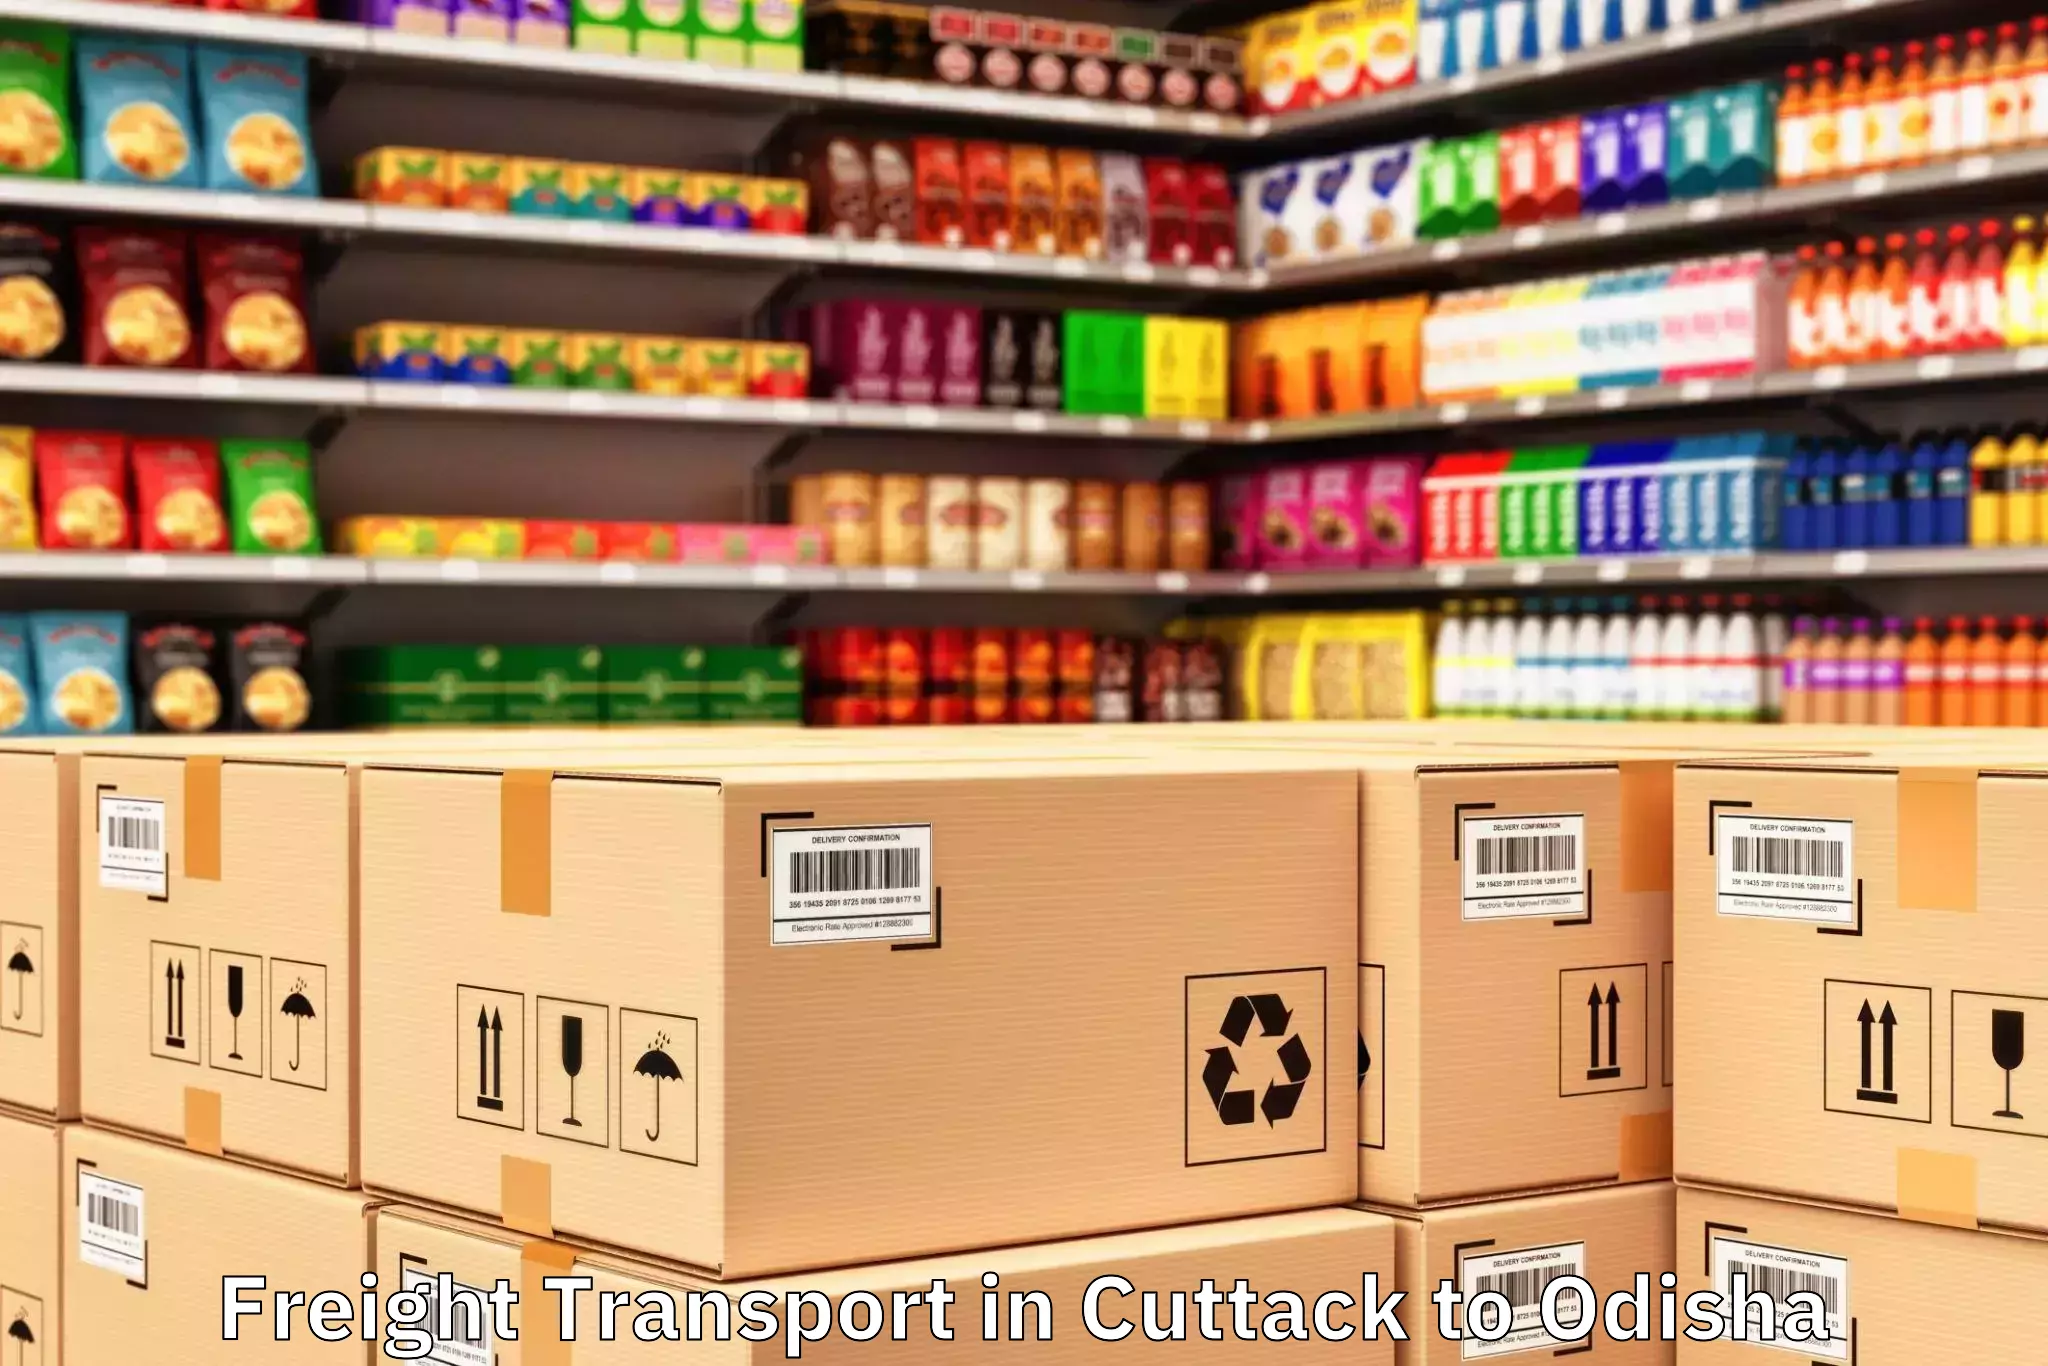 Efficient Cuttack to Nuagaon Freight Transport